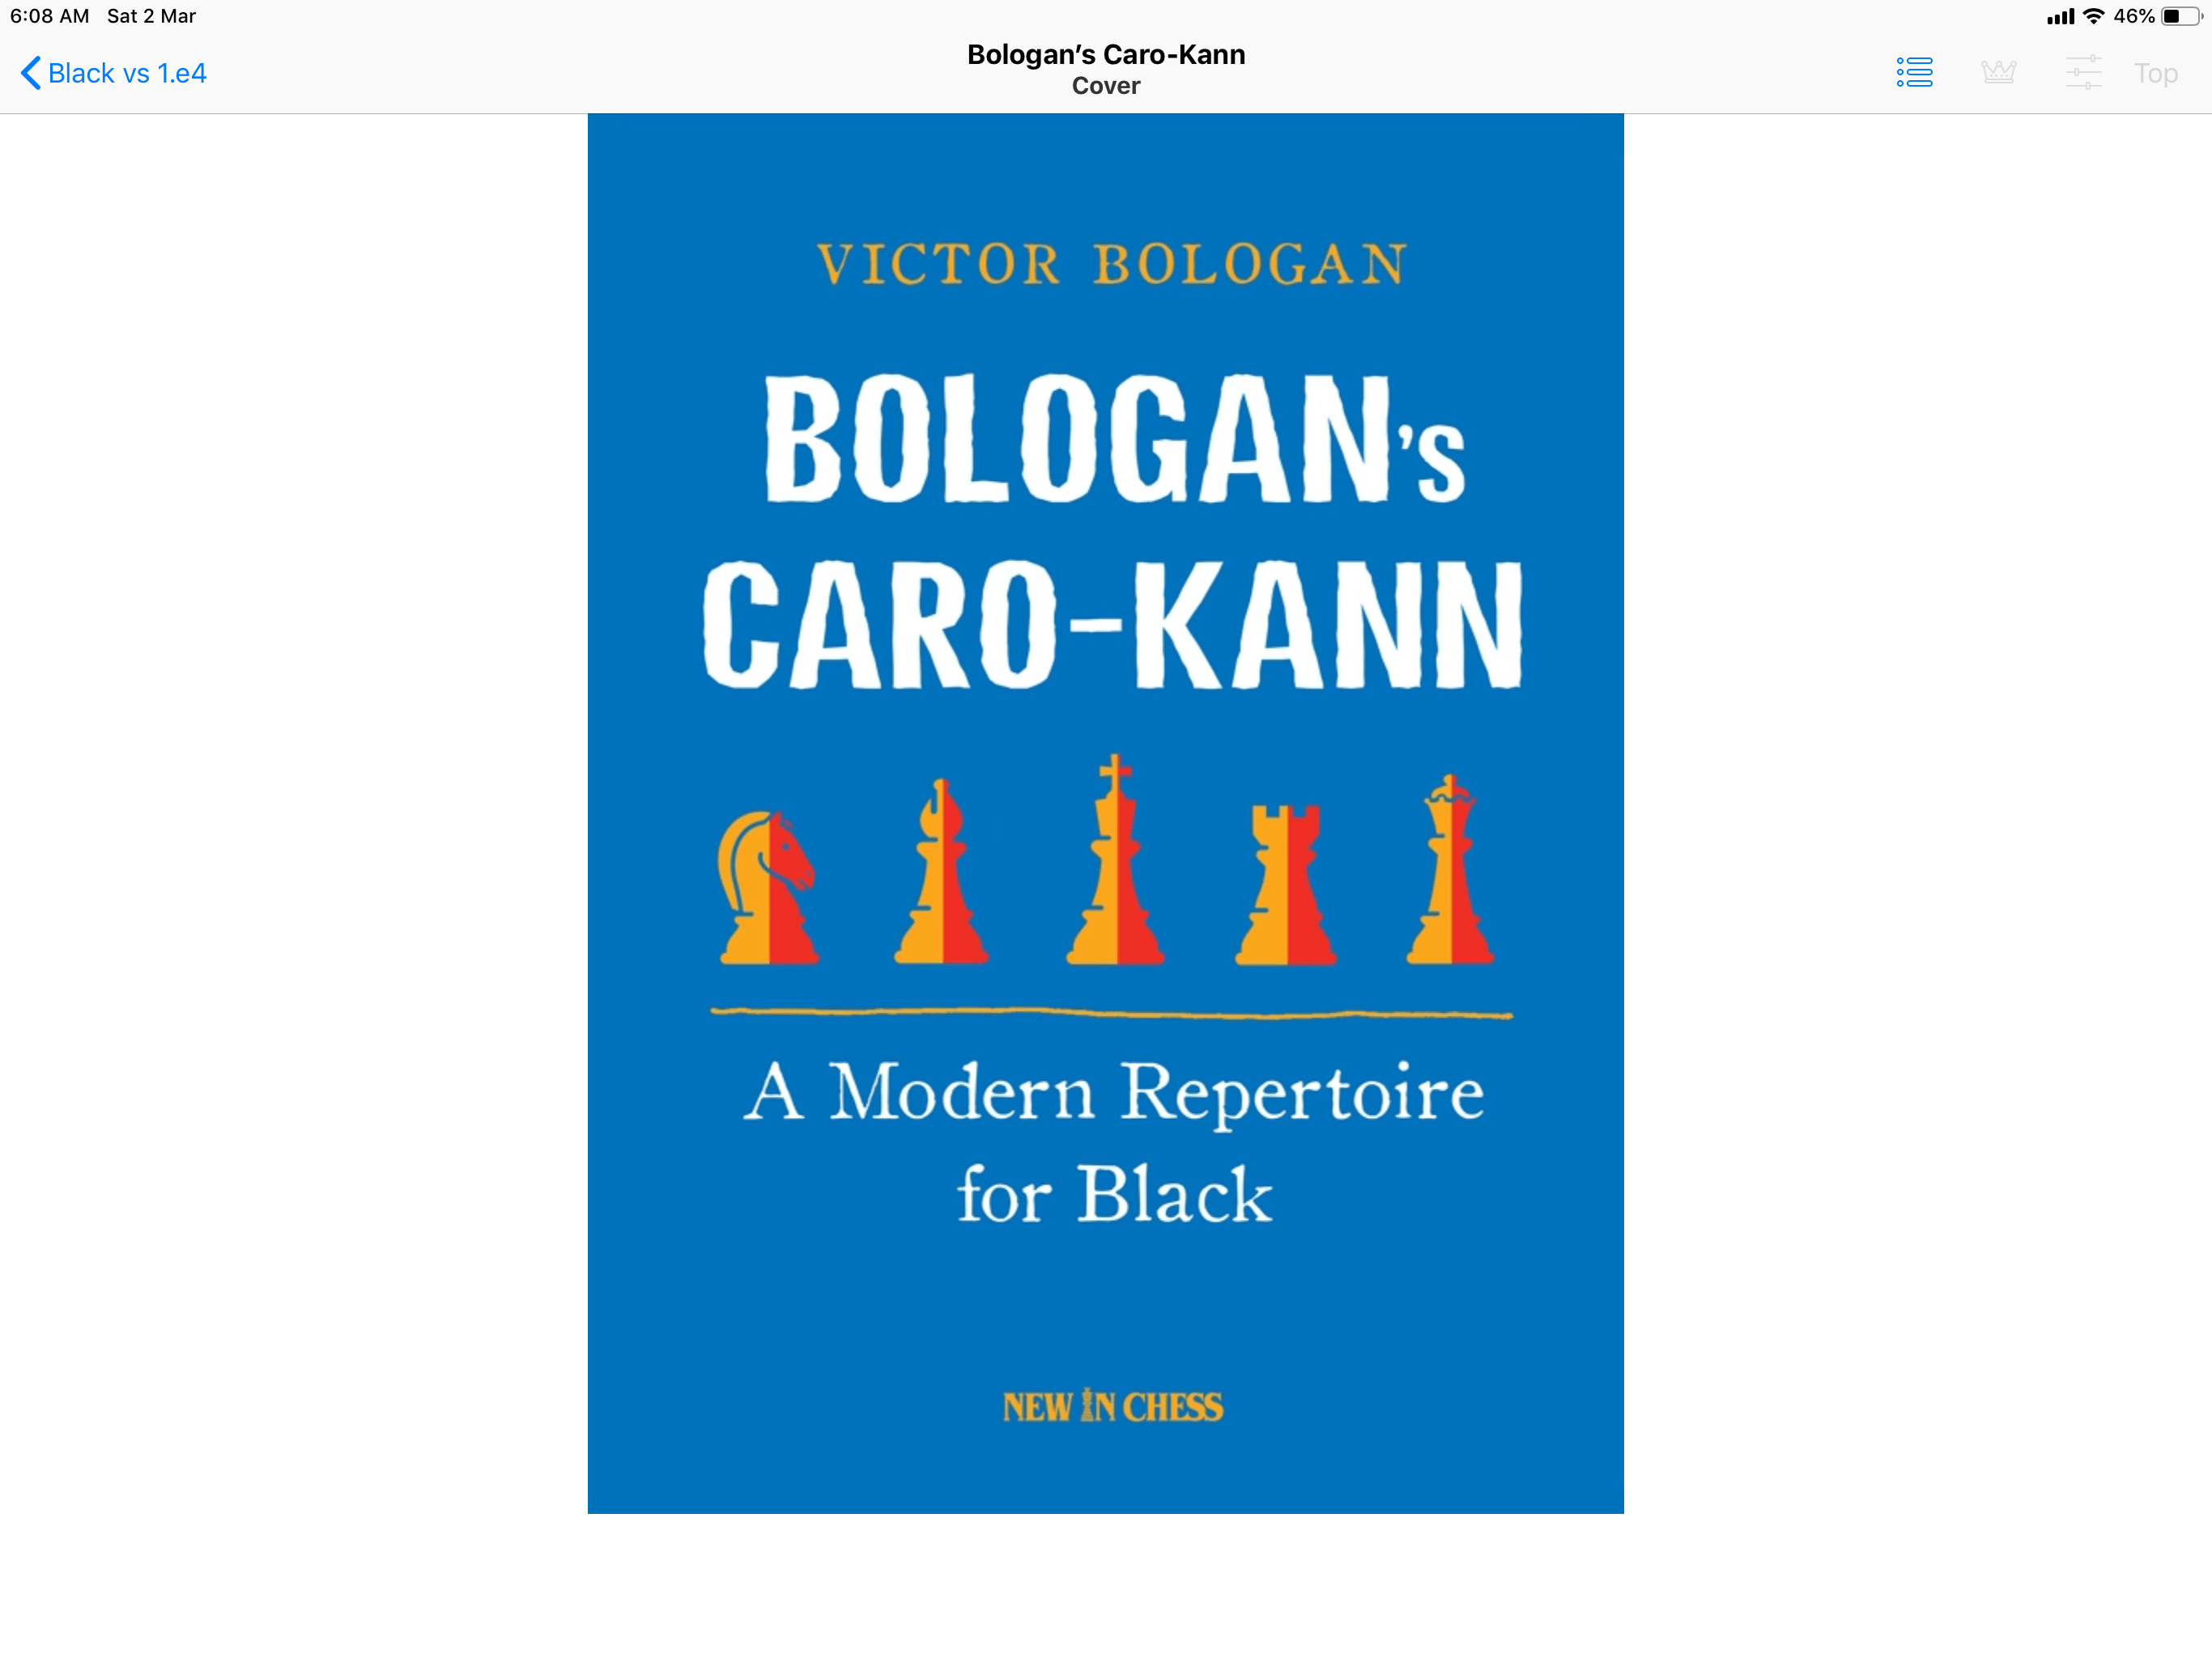 Fighting Against the Caro-Kann with the Advance Variation - Victor Bologan